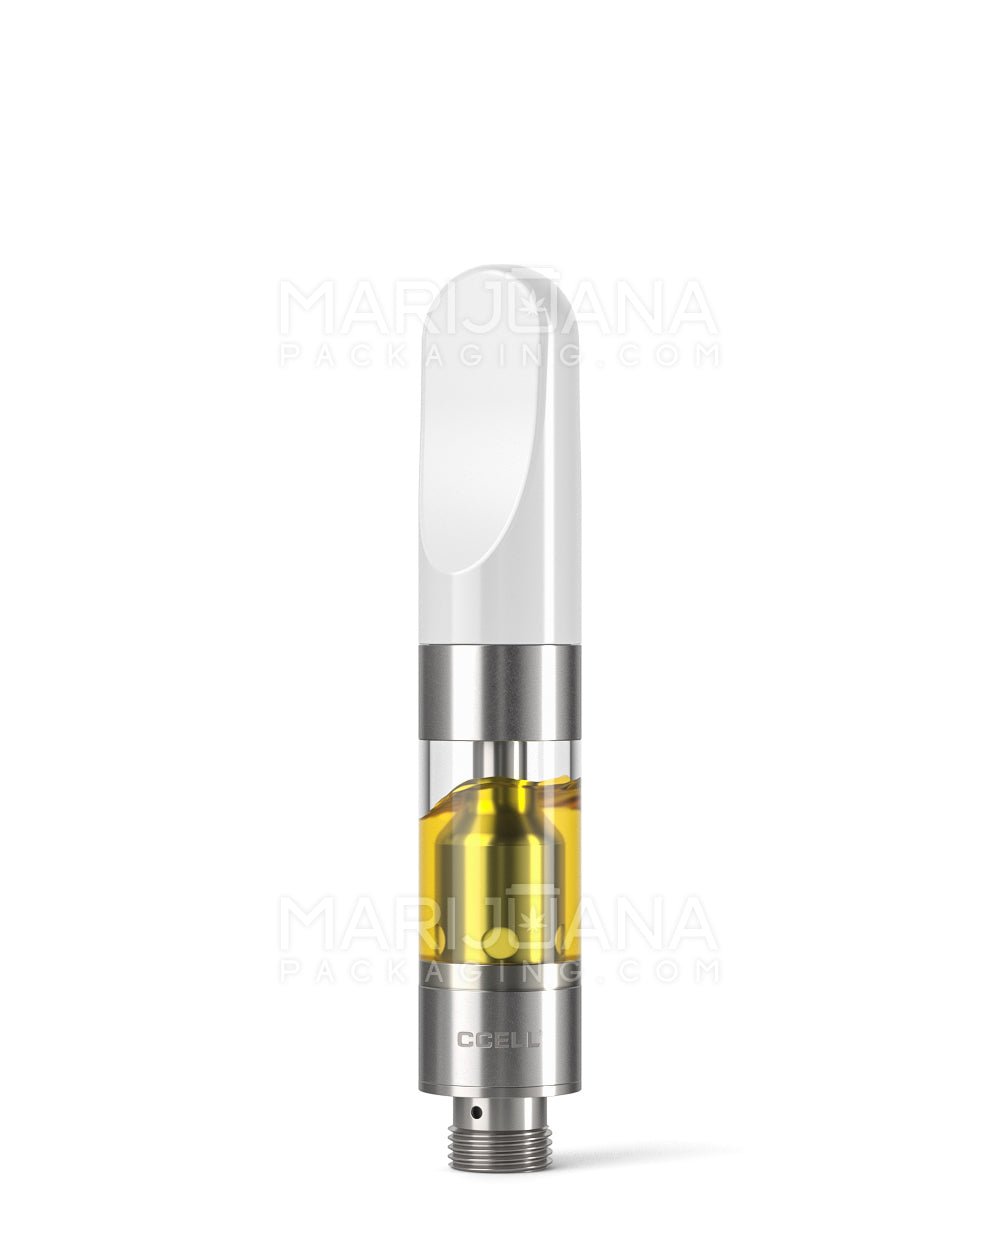 CCELL | Plastic Vape Cartridge with White Plastic Mouthpiece | 0.5mL - Press On - 100 Count - 2